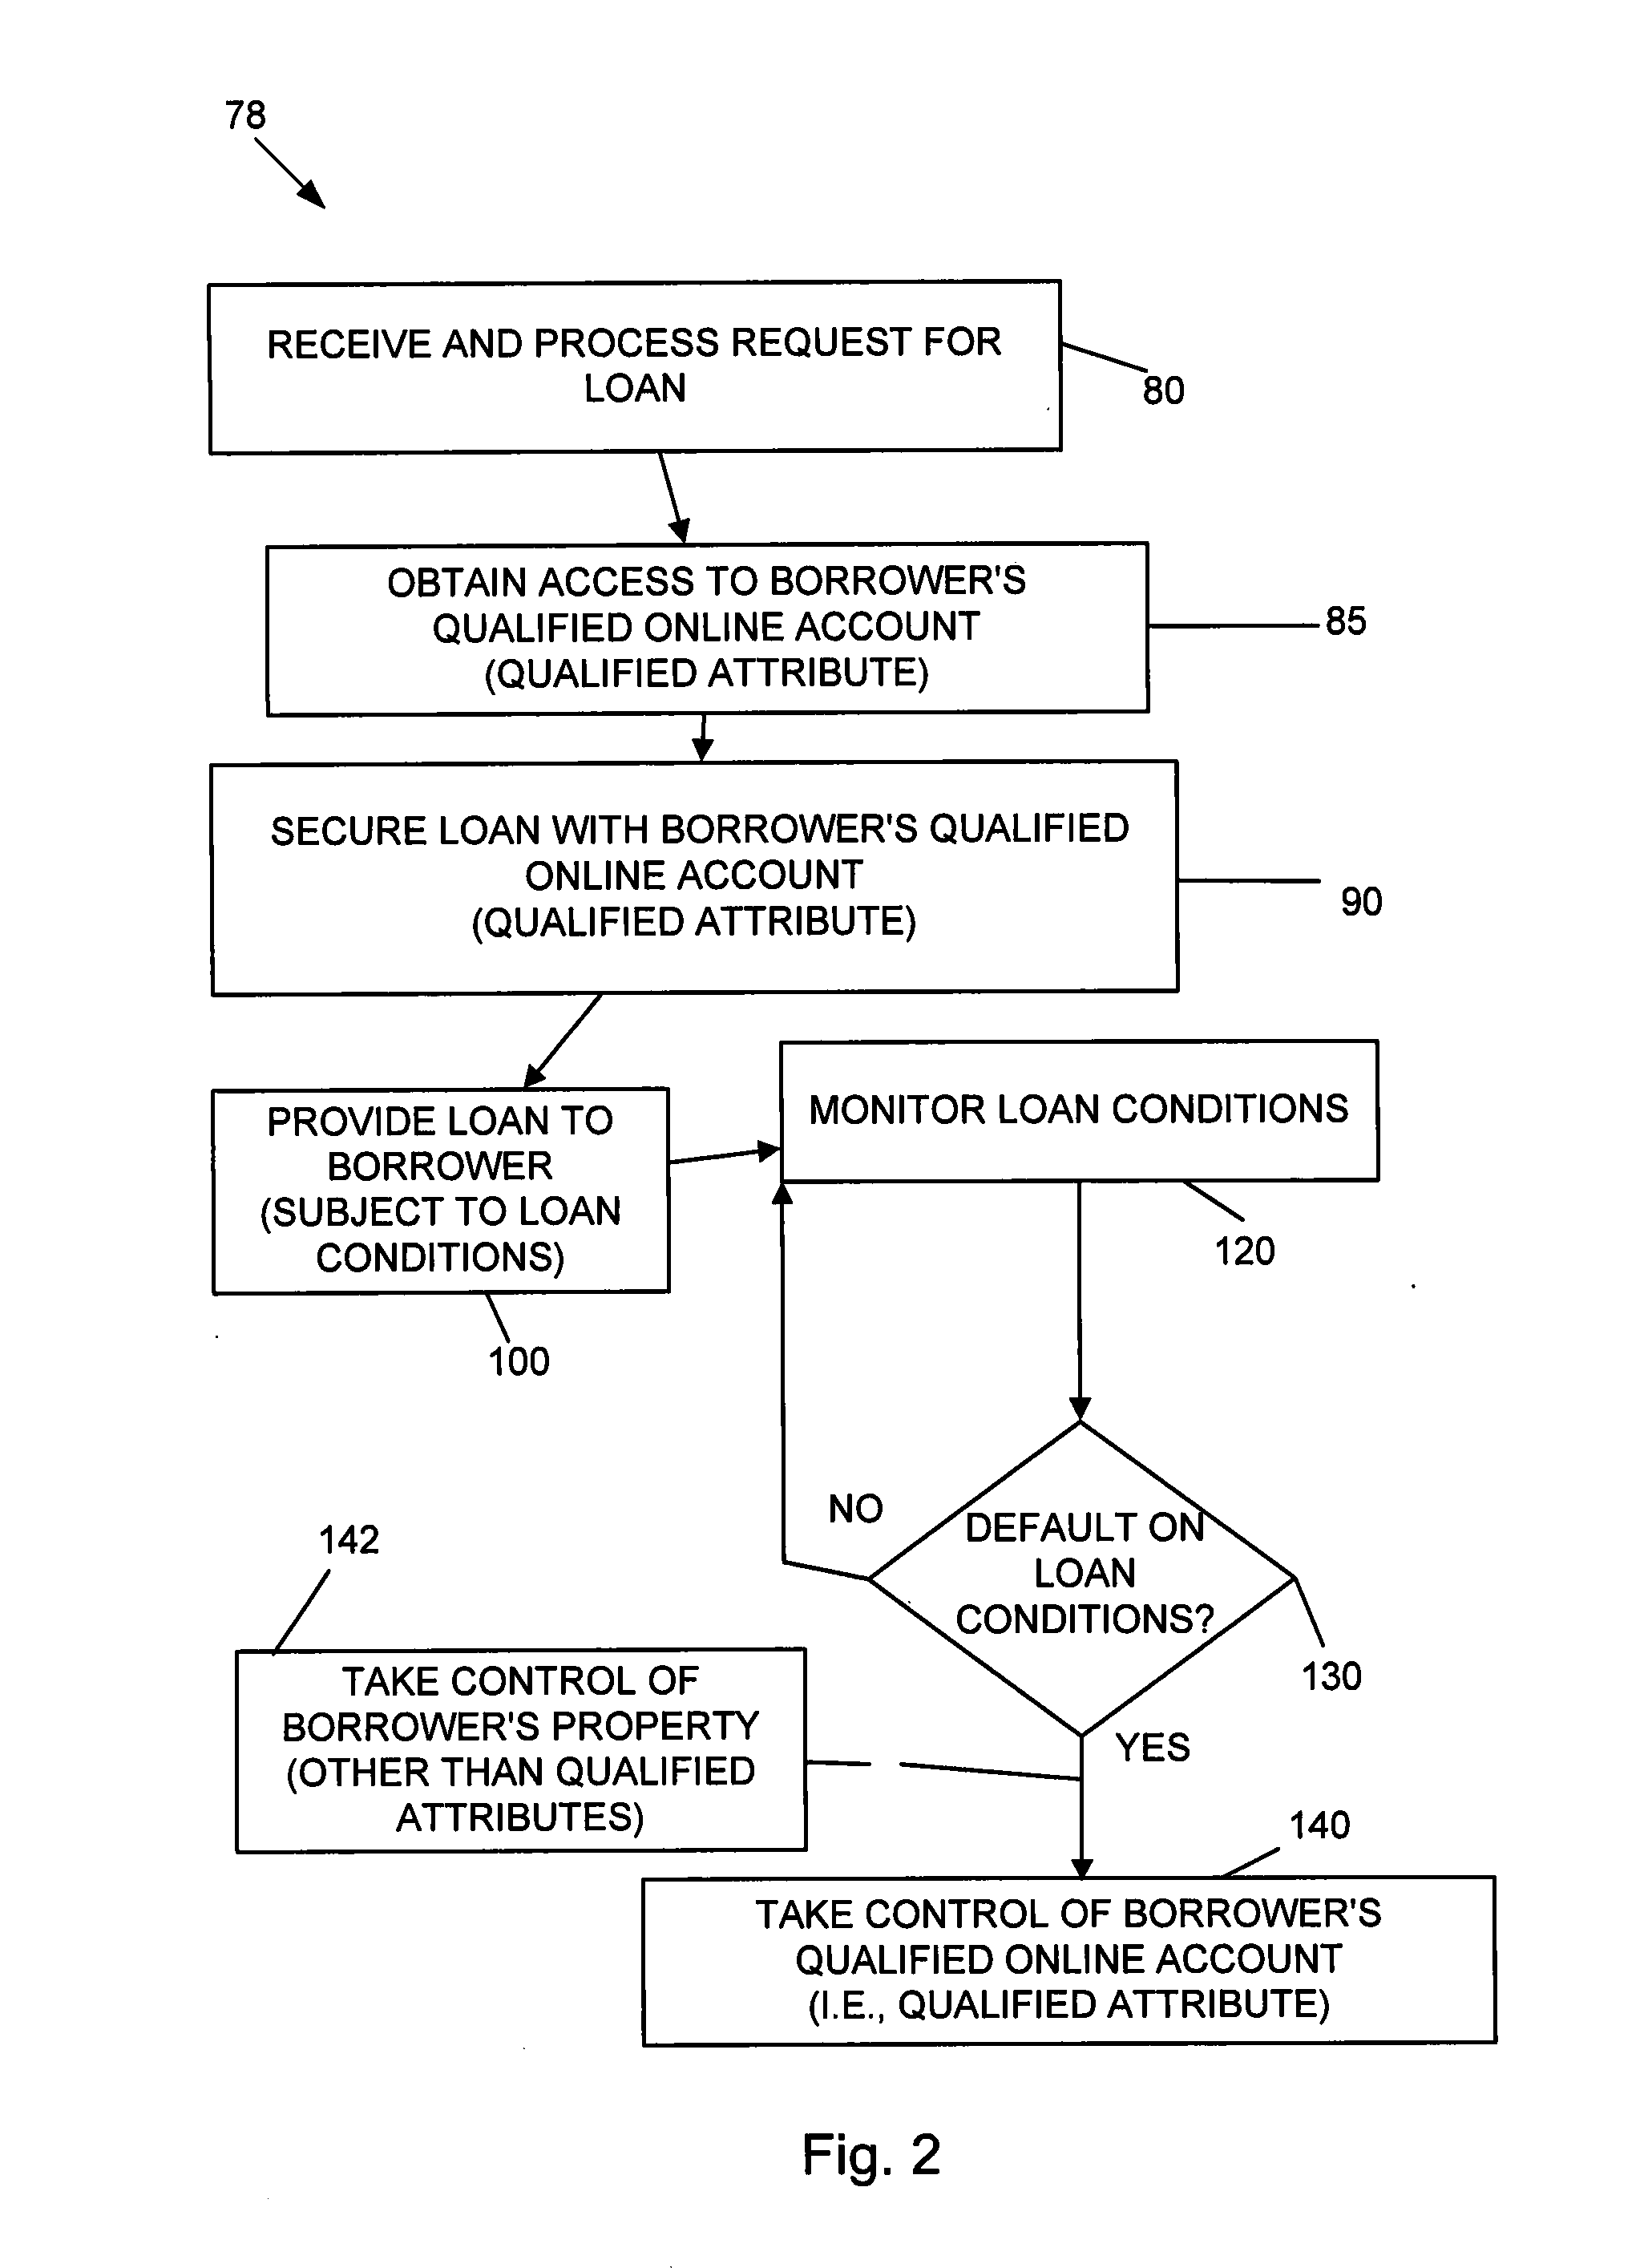 Methods and systems for improving timely loan repayment by controlling online accounts, notifying social contacts, using loan repayment coaches, or employing social graphs